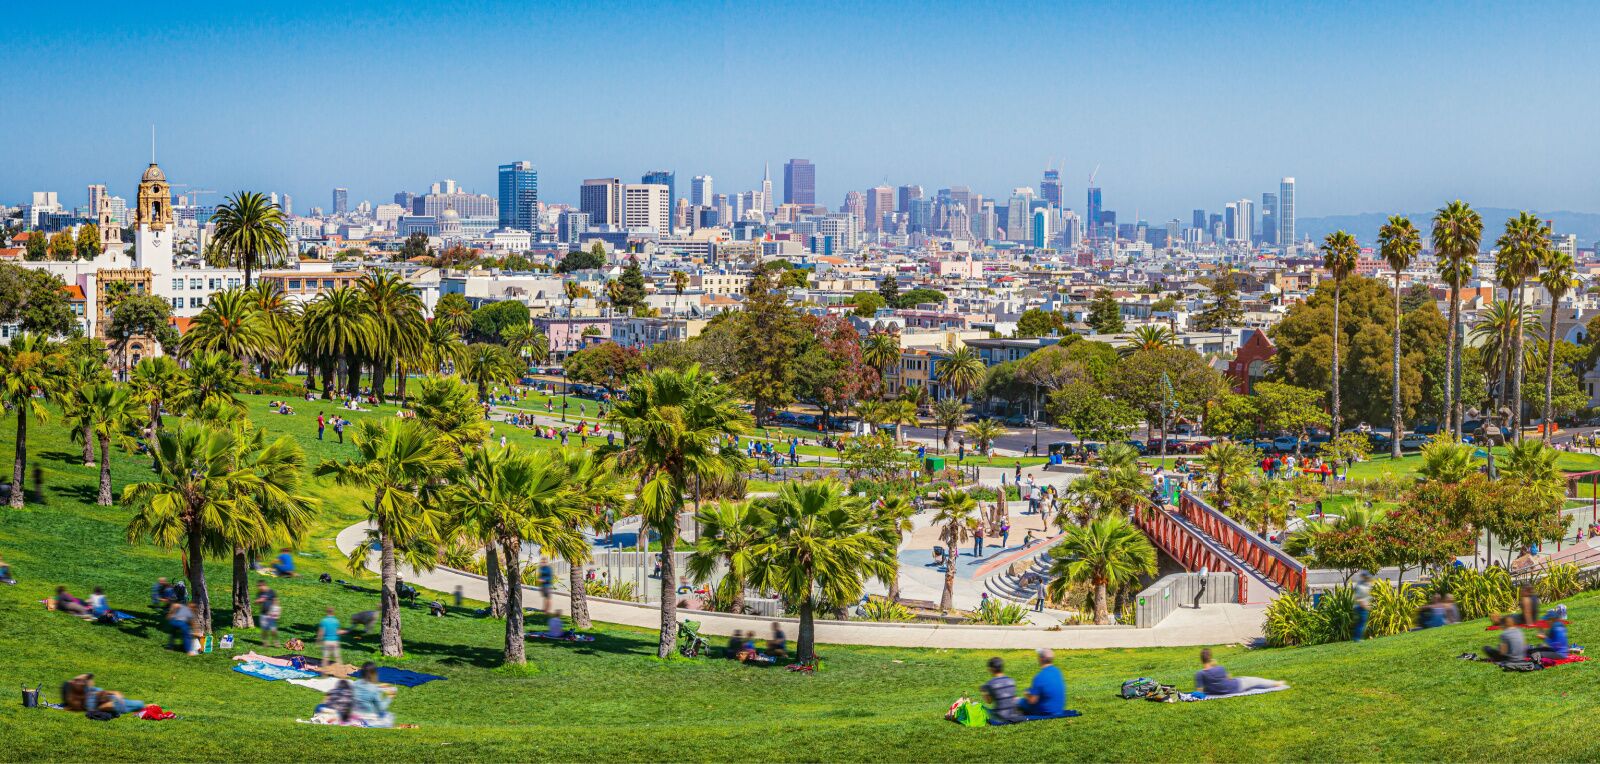 dolores, one of the best parks in san francisco, on a sunny day